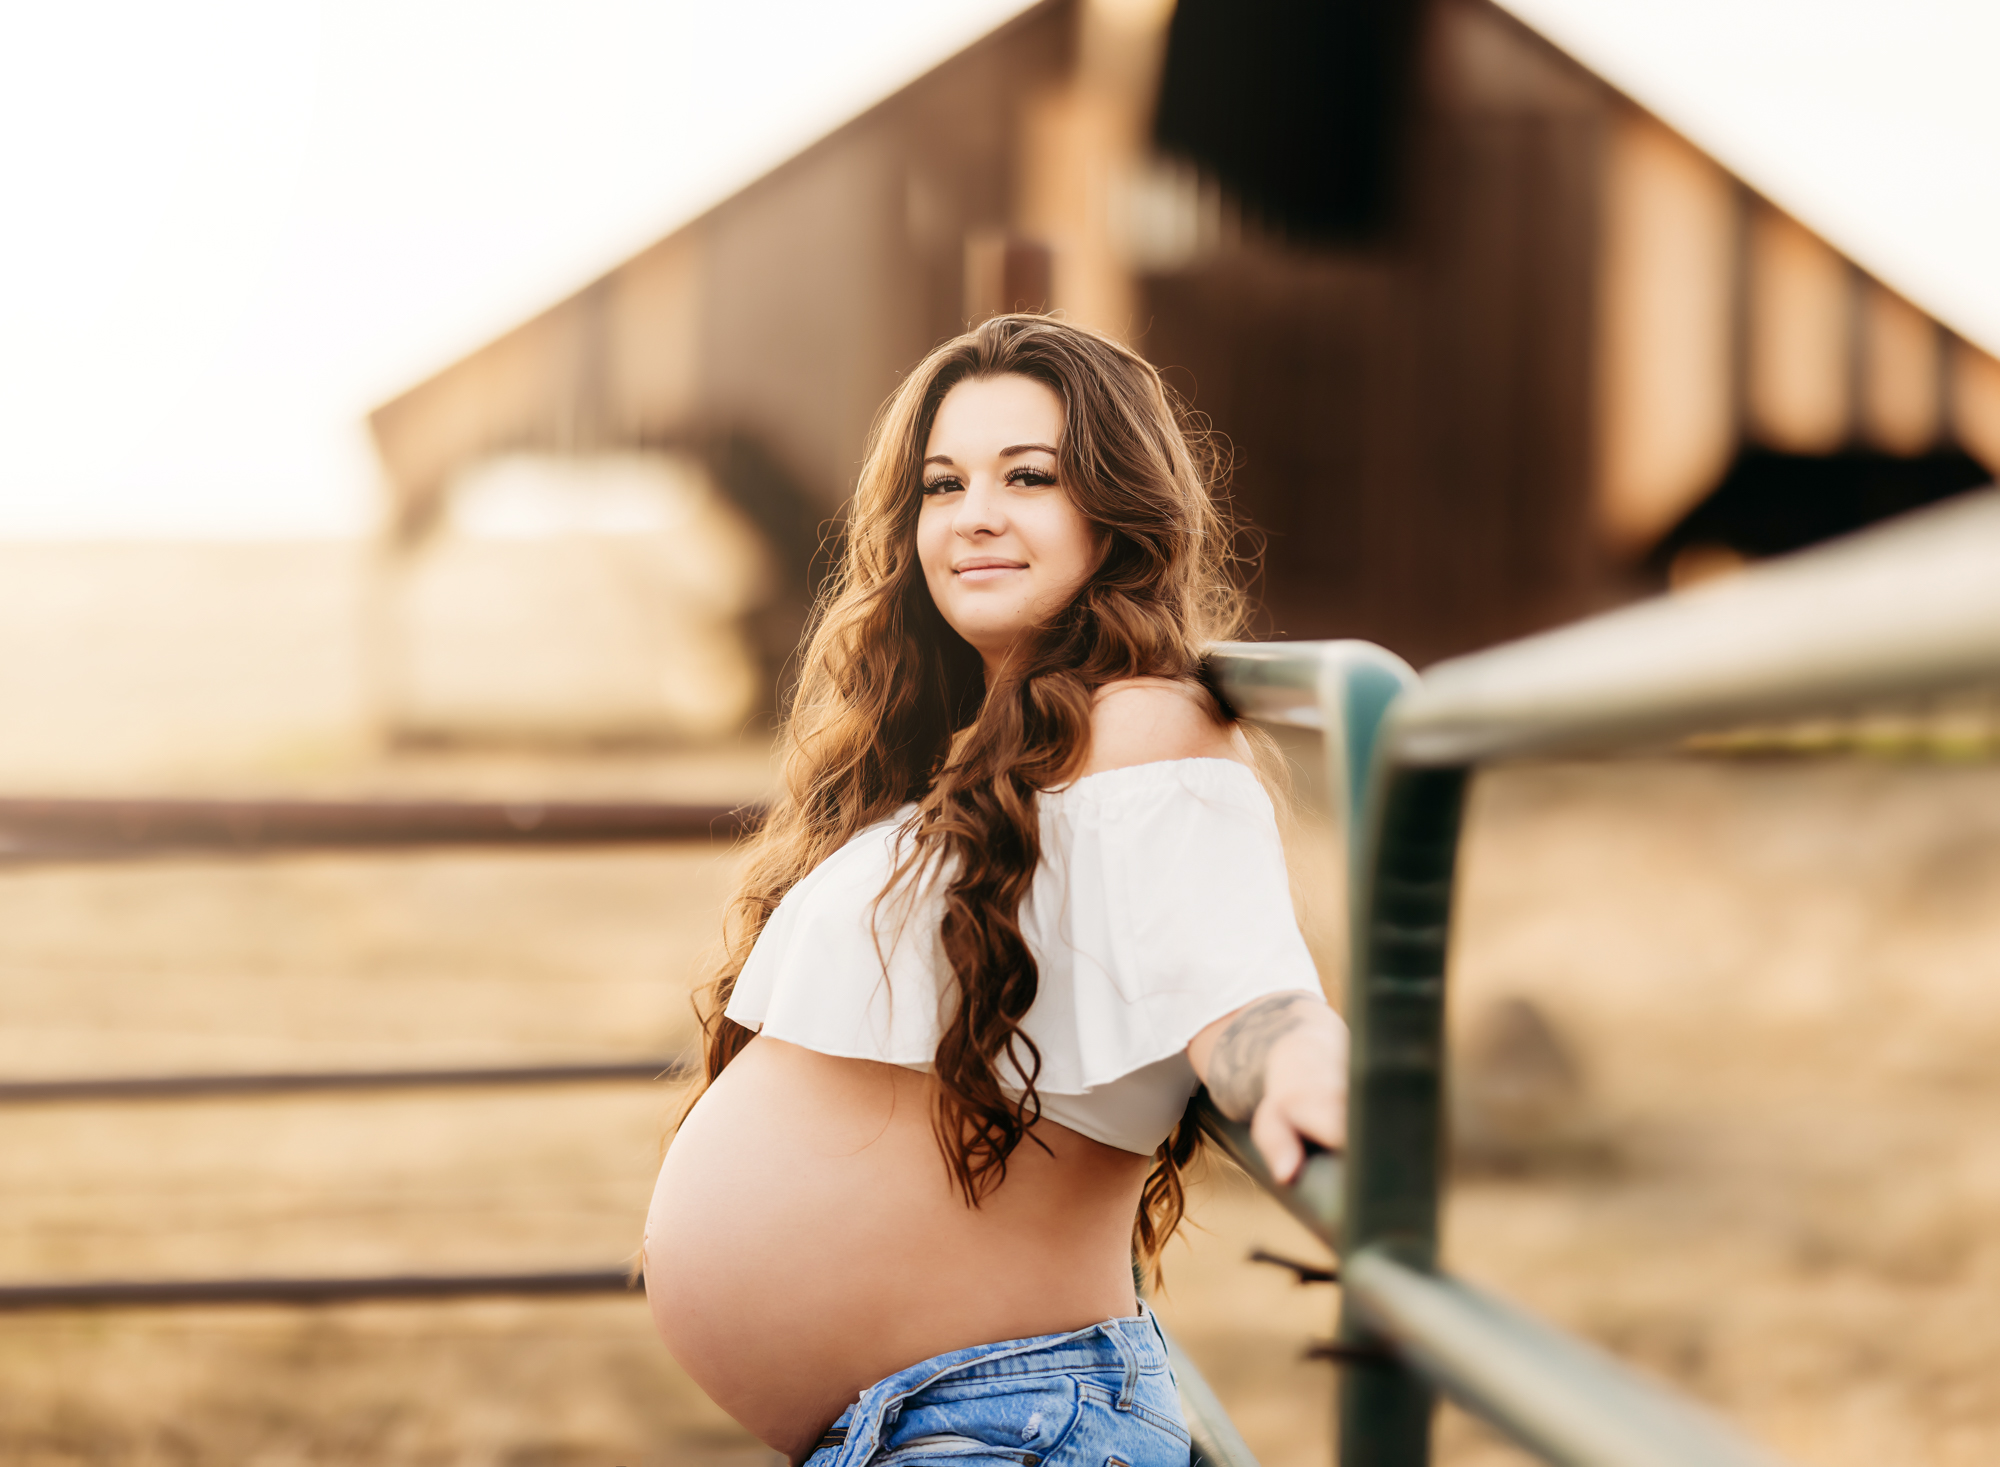 When to Schedule Your Perfect Maternity Photoshoot